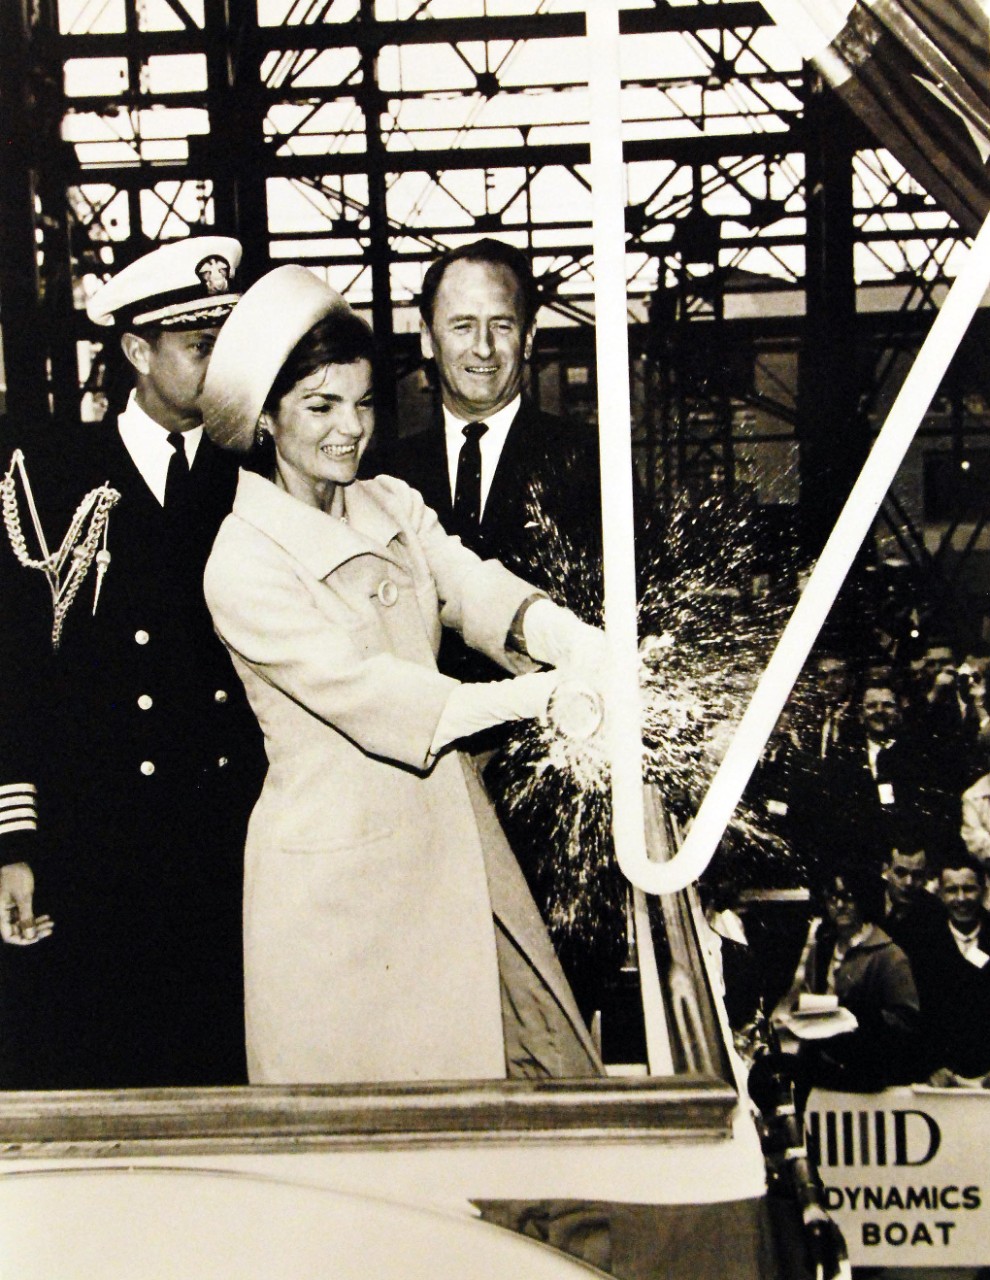 LC-USZ62-85385:   USS Lafayette (SSBN-616), 1962.  Christening of the submarine by First Lady Jacqueline Kennedy on May 8, 1962 at Electric Boat, General Dynamics, in Groton, Connecticut.   U.S. Navy Photograph.  Courtesy of the Library of Congress.   (2016/06/17).    